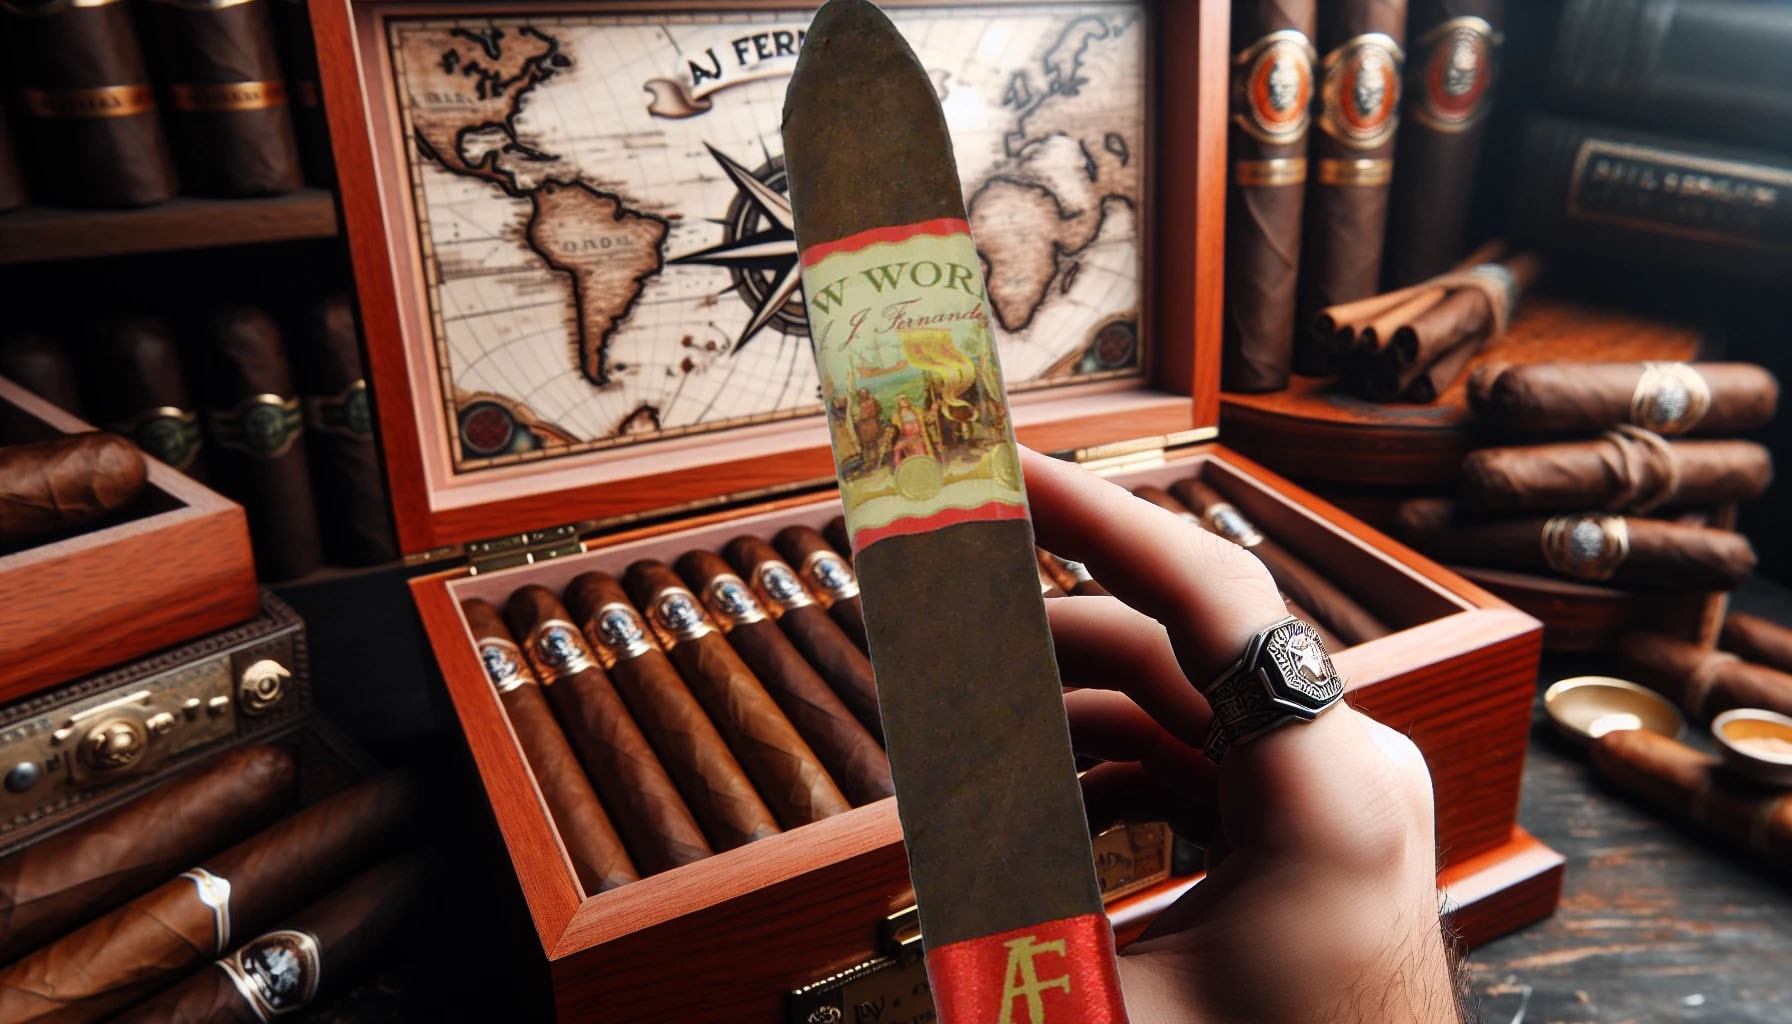 Enhancing your cigar collection with the New World discovery flavor